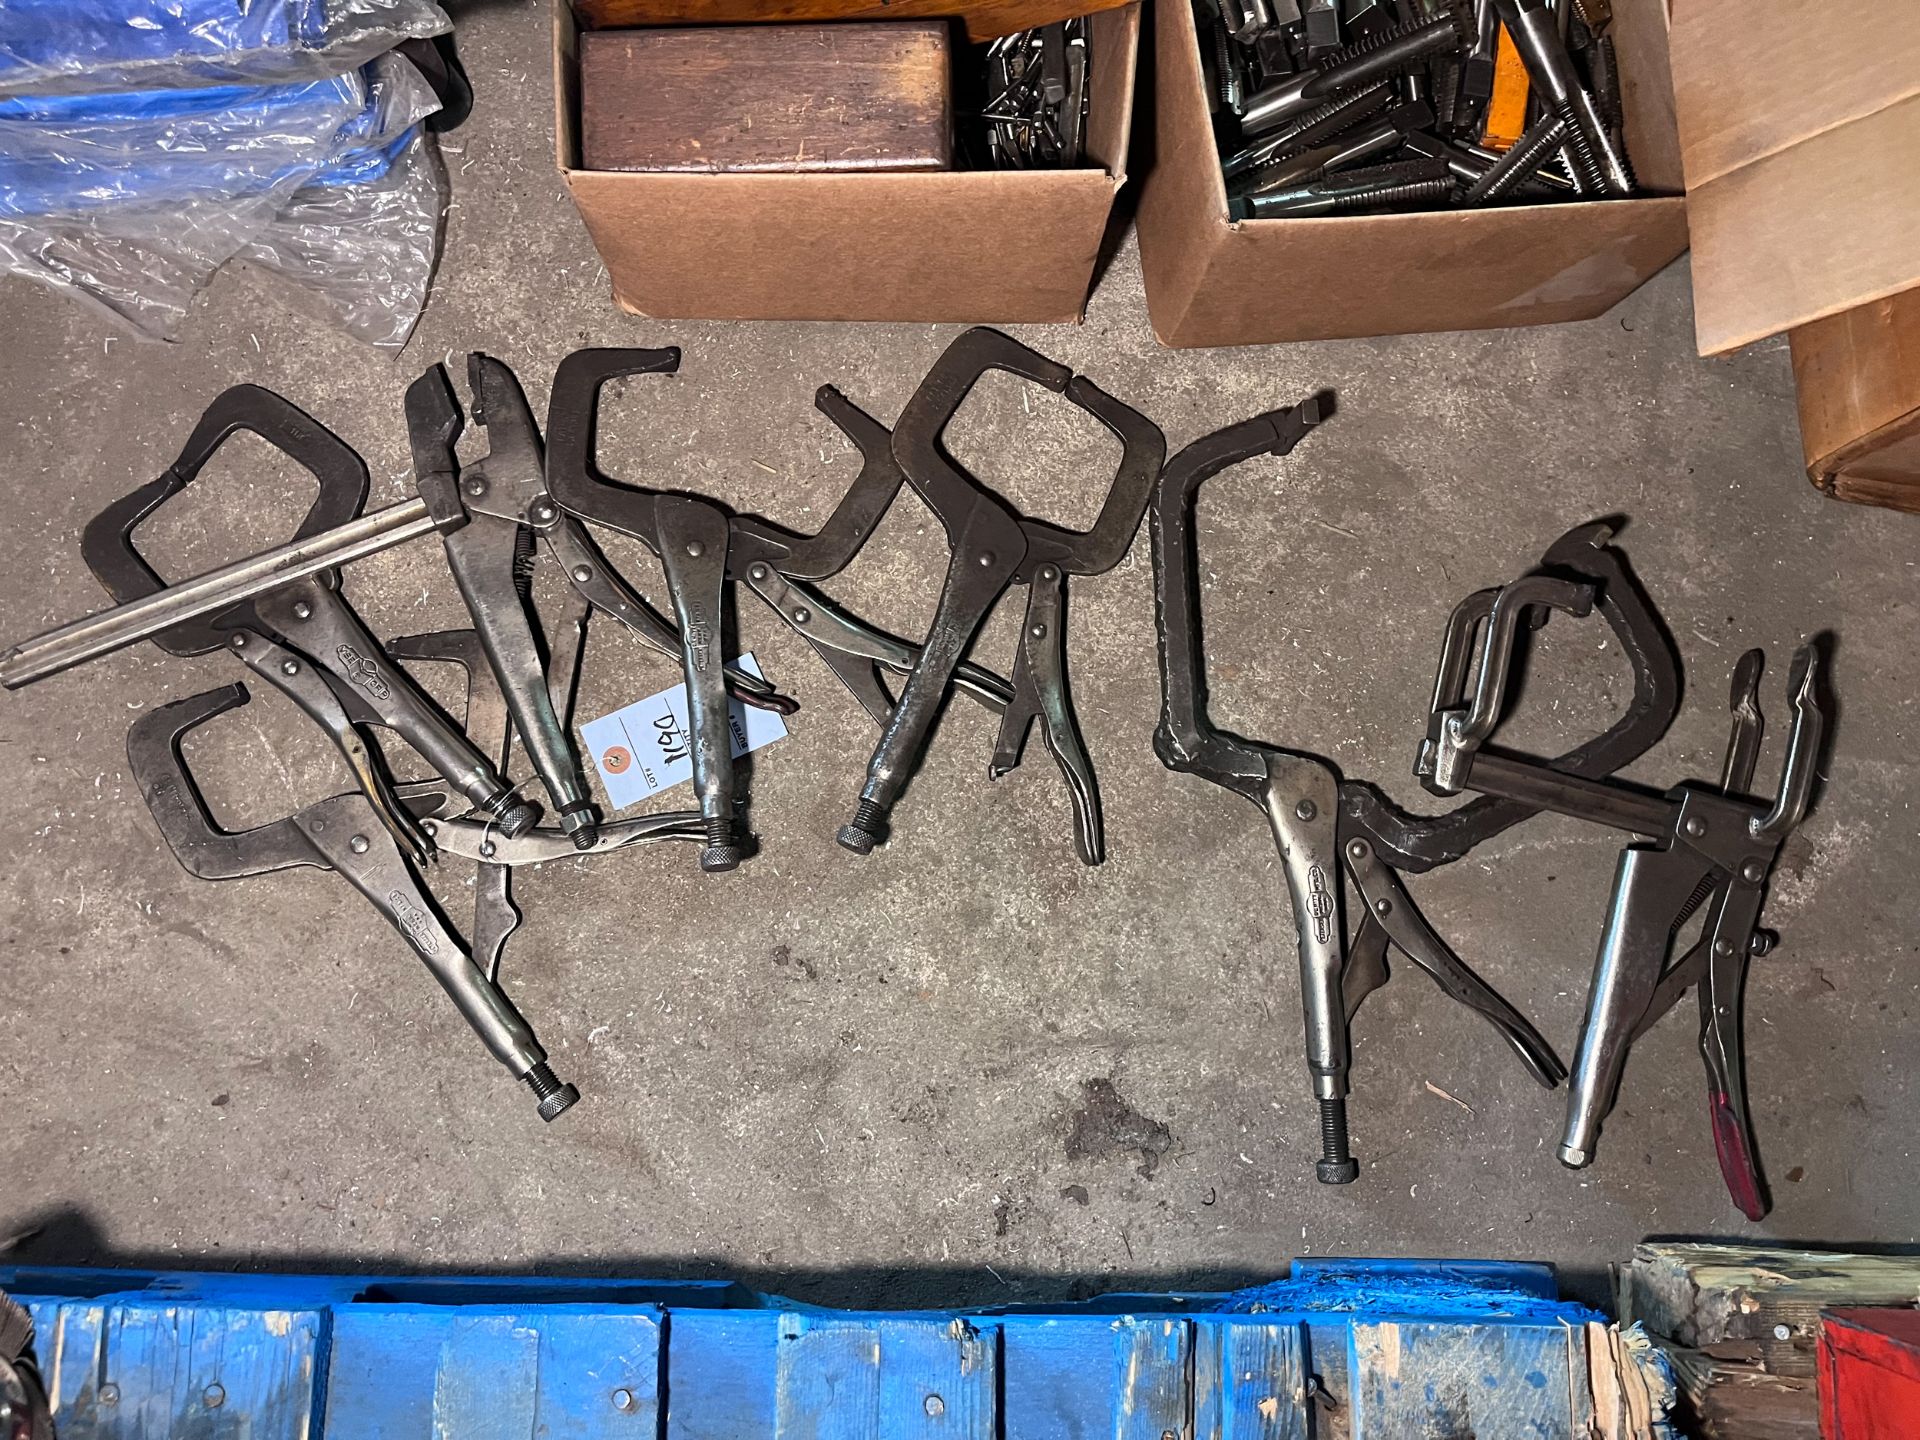 Lot of Locking Vise Clamps